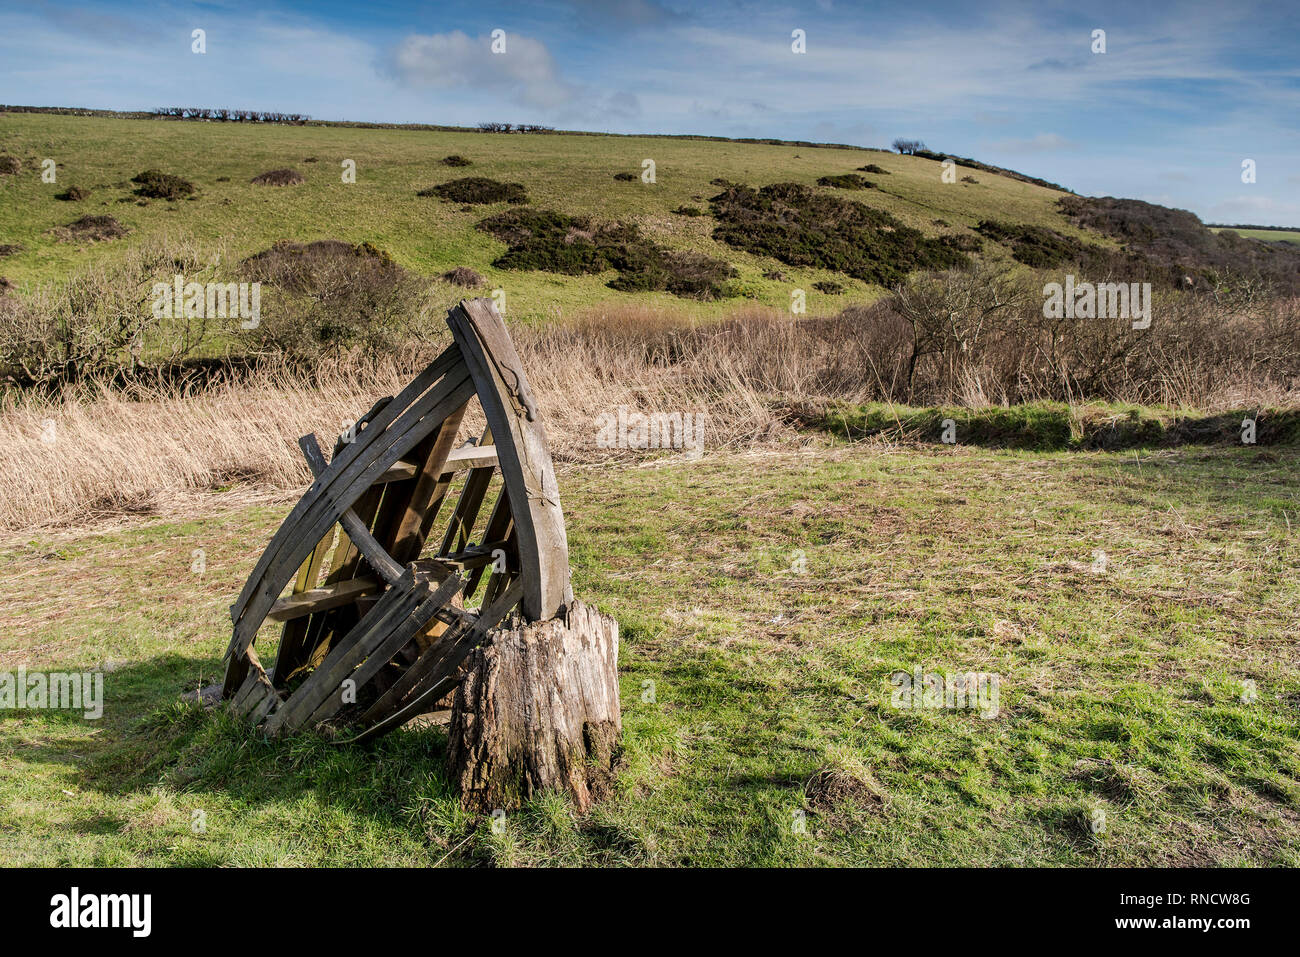 A wooden sculpture in front of a reed bed Phragmites australis in the hidden valley leading down to the secluded Porth Mear Cove on the North Cornwall Stock Photo